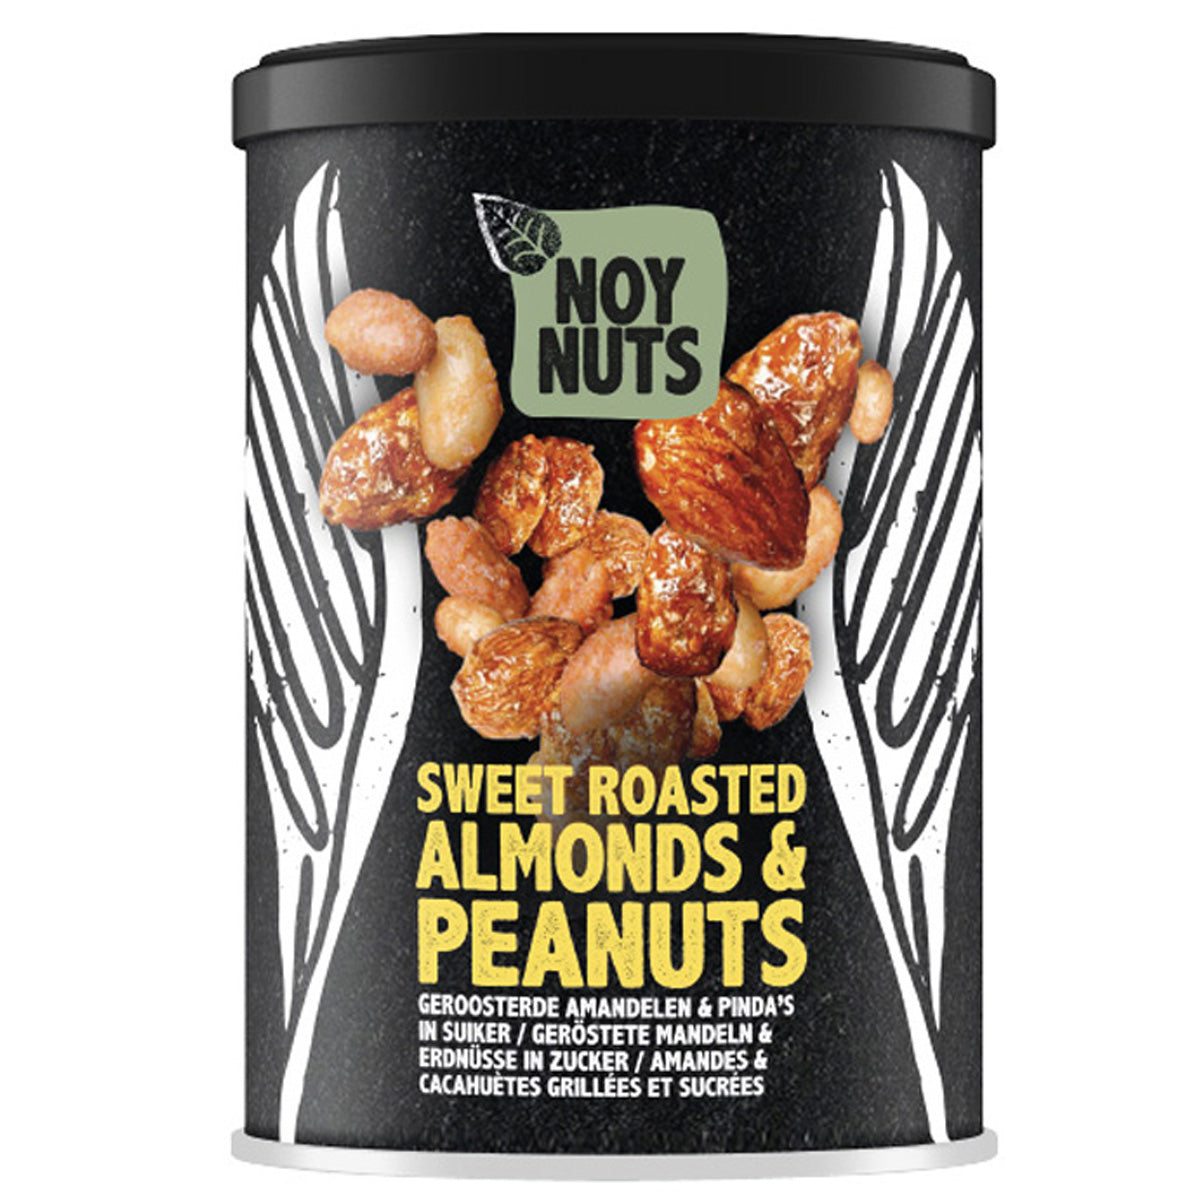 Noy Nuts Sweet Roasted Almonds & Peanuts nootjes